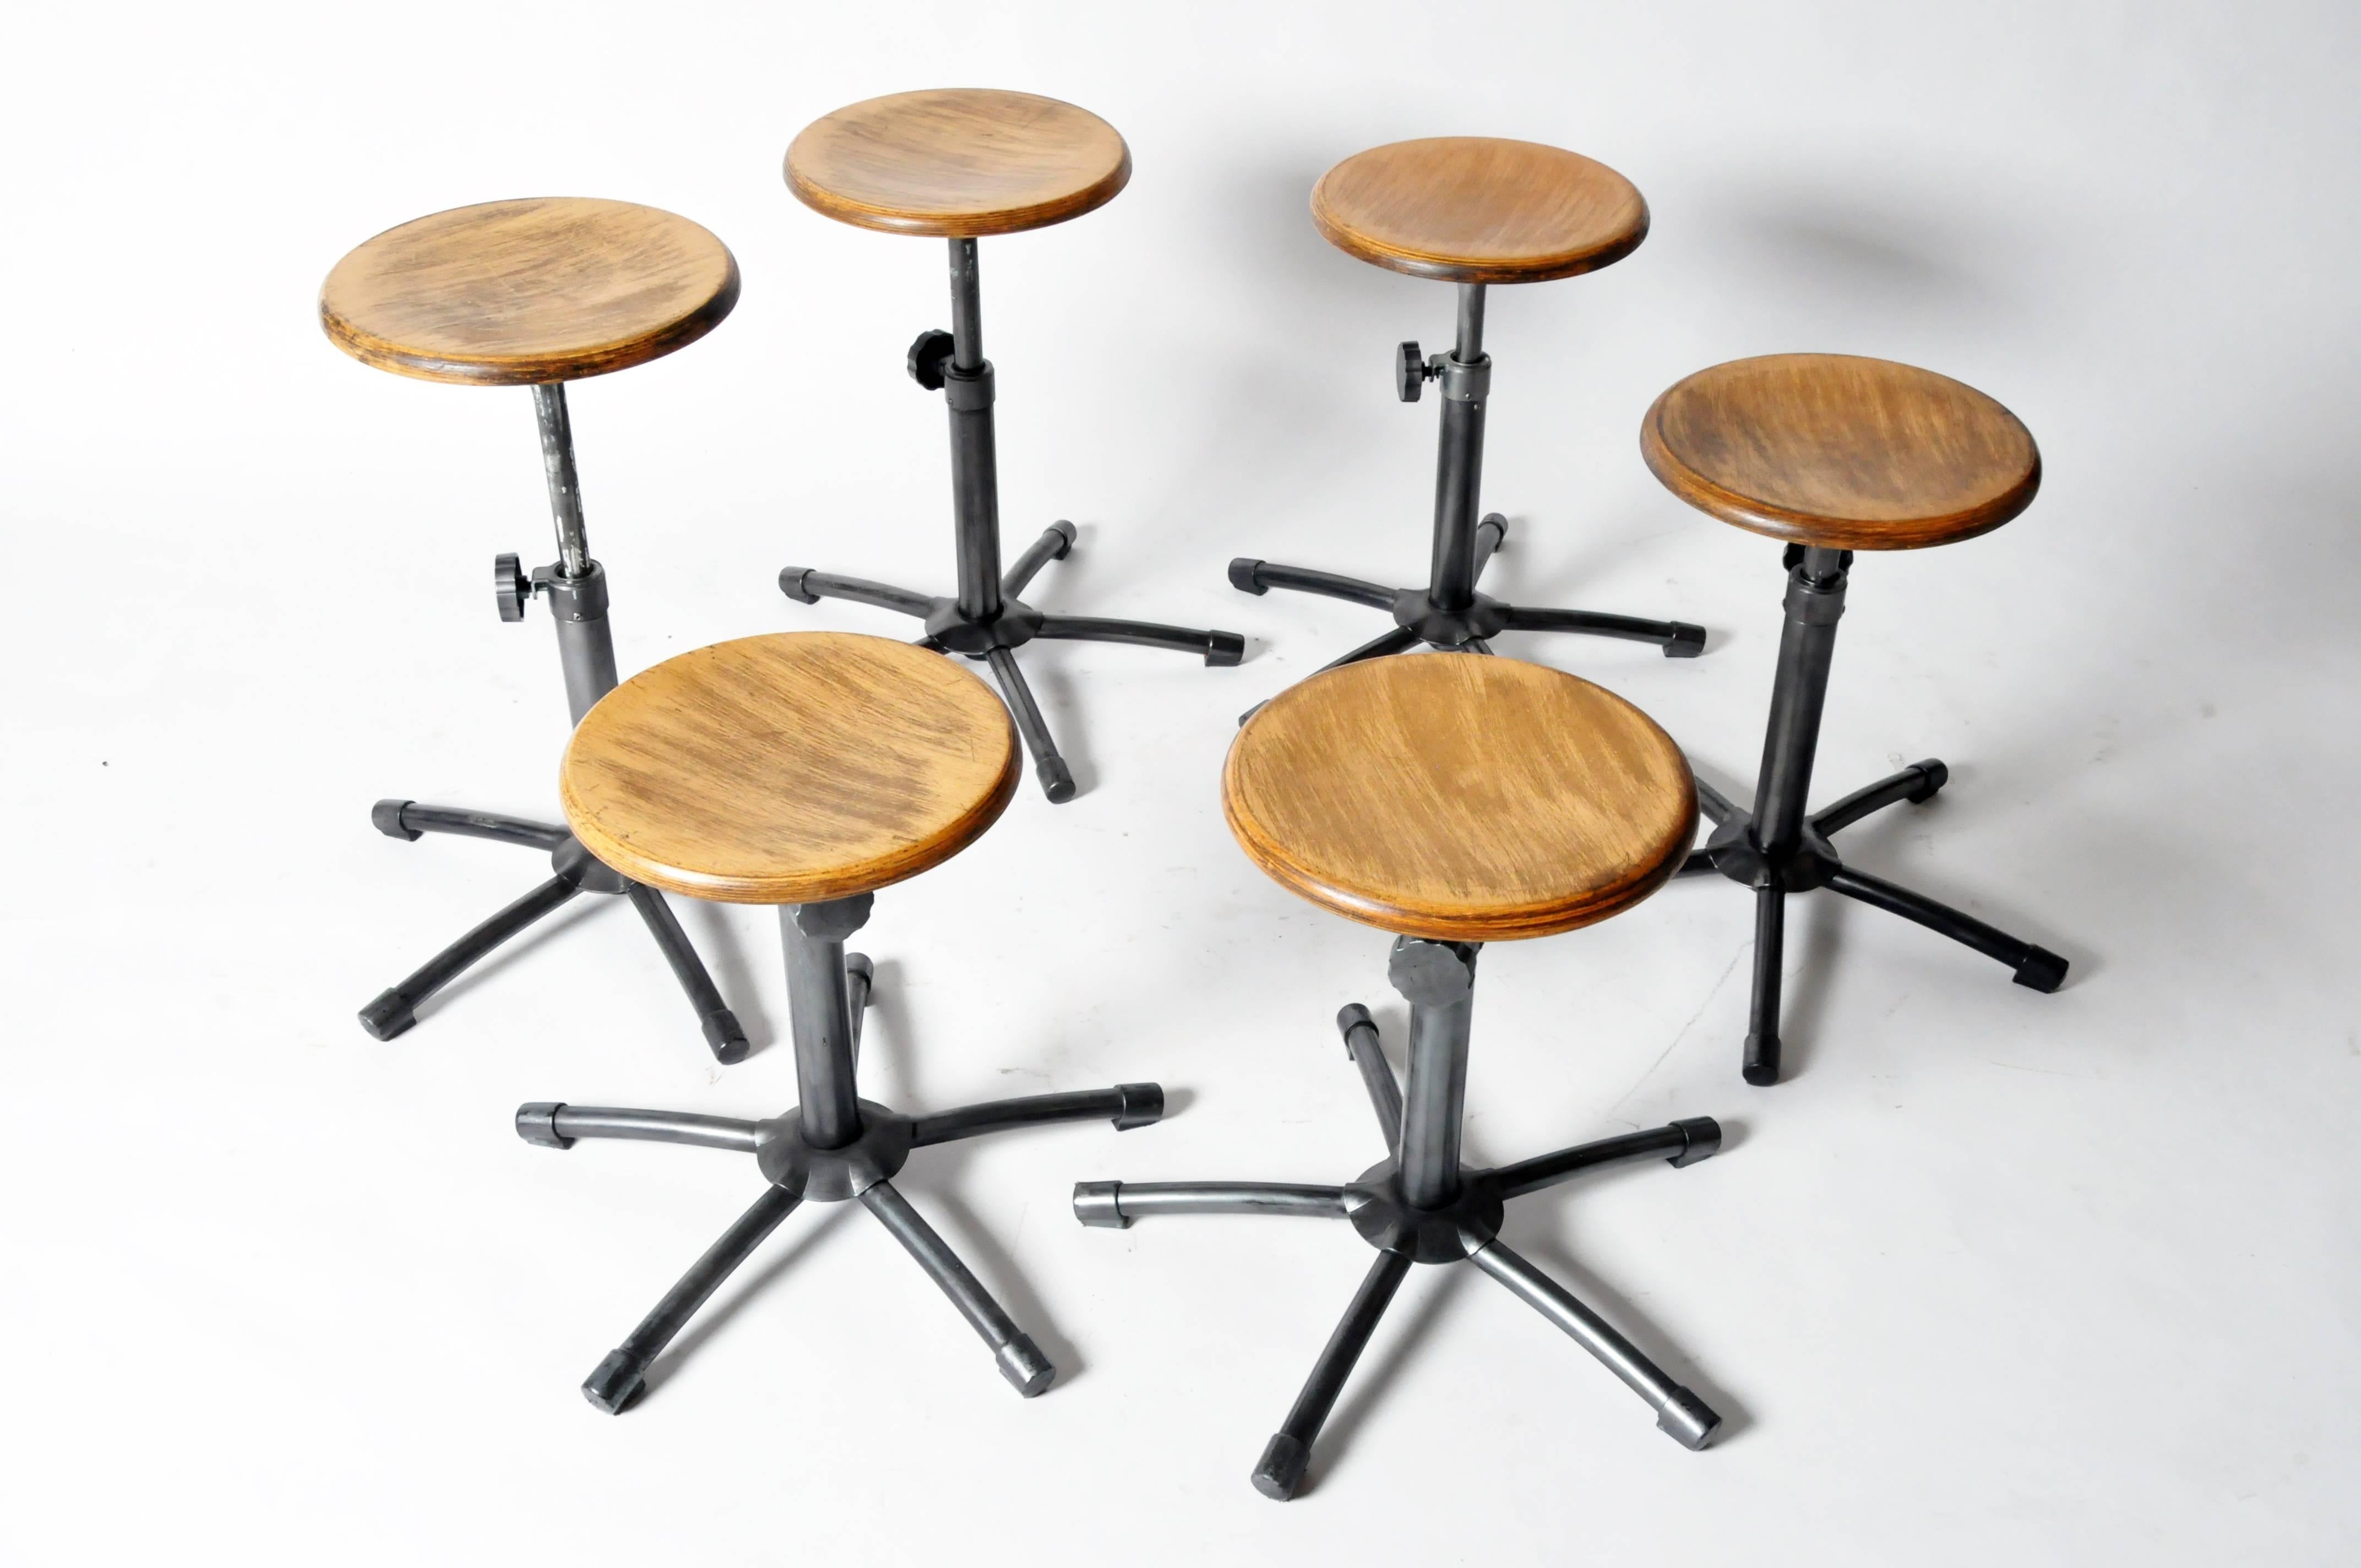 The circular wood seat is raised on an adjustable stem supported by five splayed, tubular legs. Six total, discount available if purchased as a group; measurements reflect stool seat fully extended.